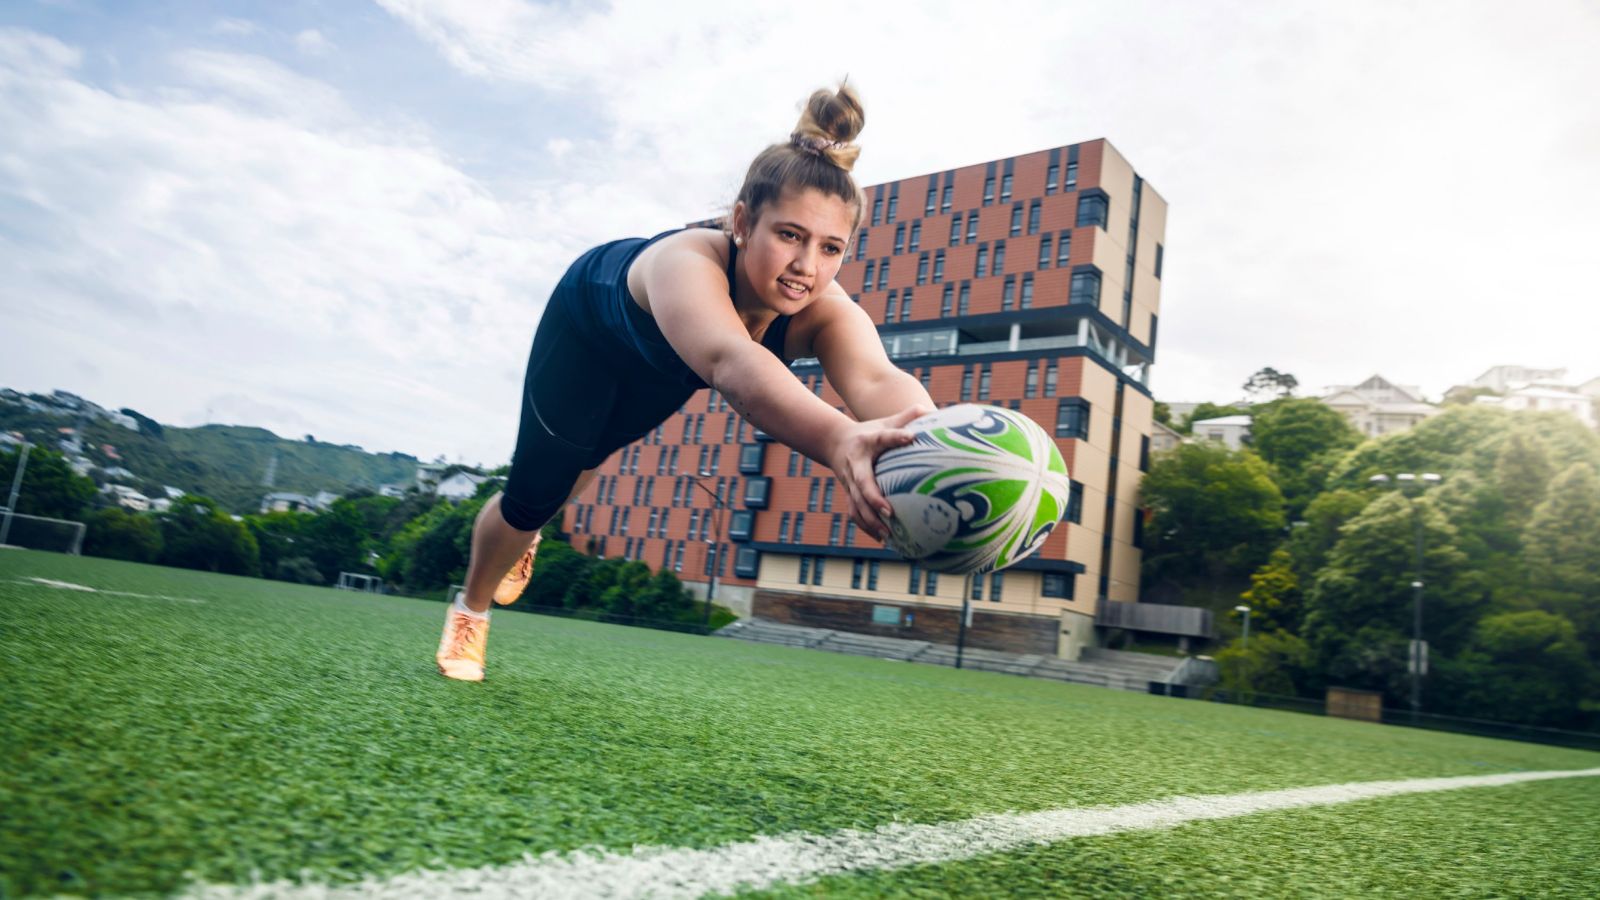 A young woman scoring a try on a field